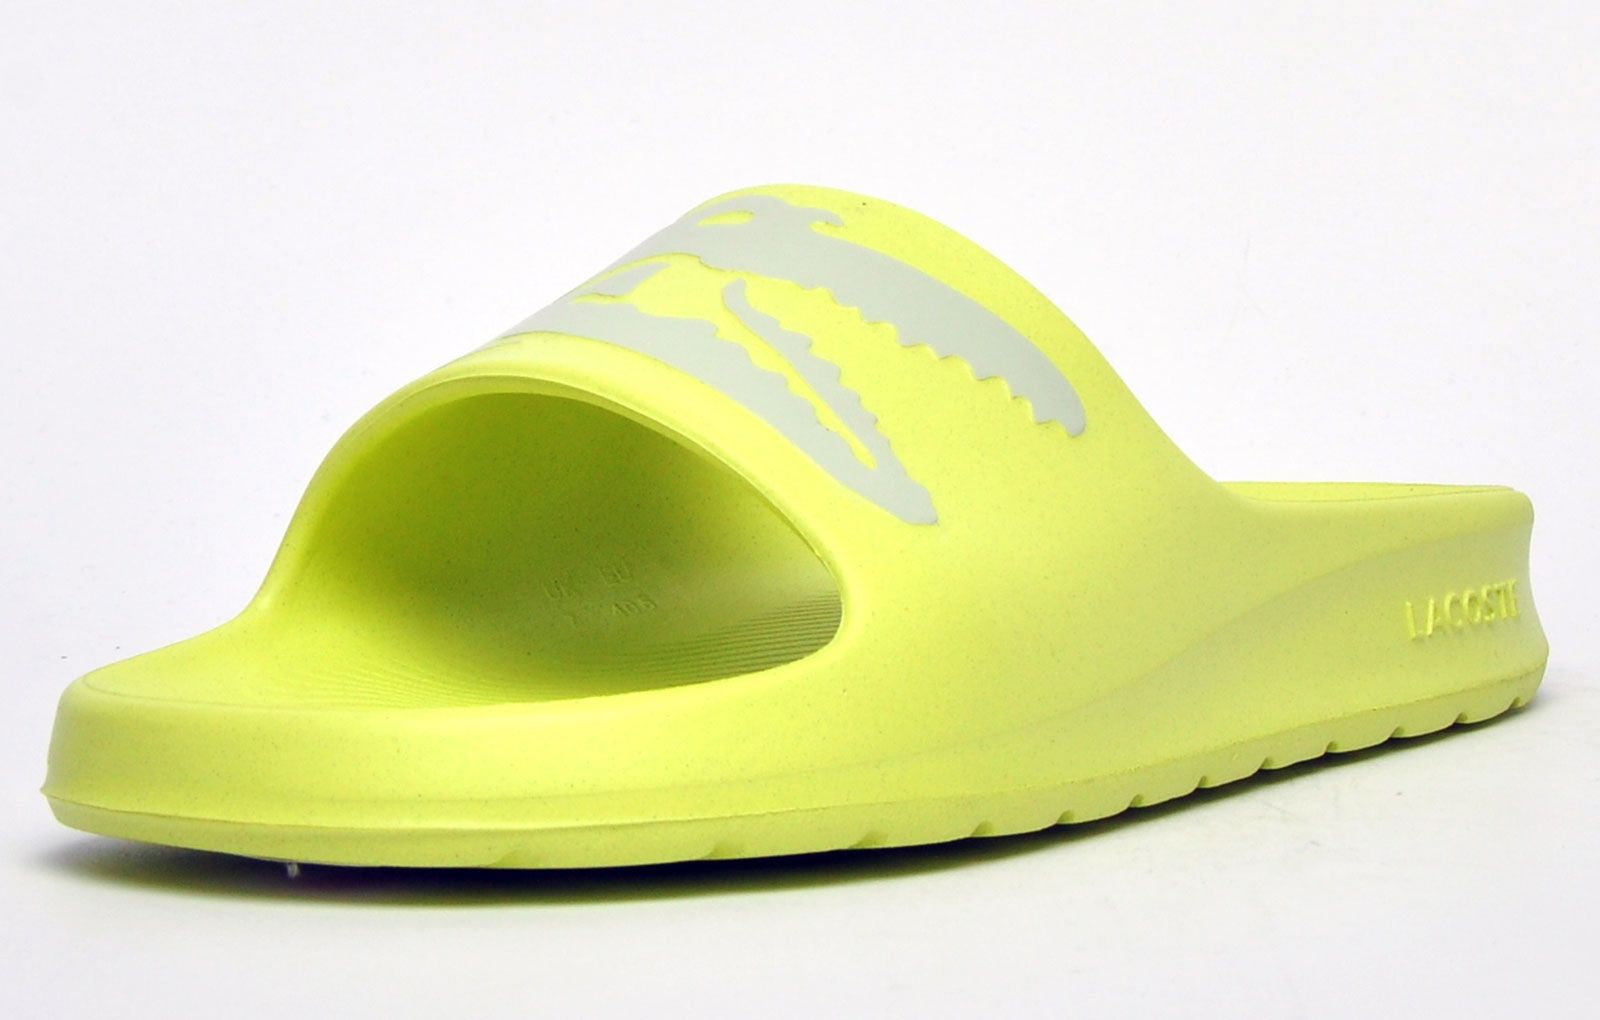 Step into eye catching summer style with these mens Croco Slides from Lacoste. In a bang on trend colourway, these designer sandals are delivered in a smooth synthetic upper with Croco detailing across the forefoot foot strap. The one piece upper delivers a super comfy footbed which moulds to your feet delivering the perfect fit and feel while the grippy outsole will keep you sure and safe around the pool or in the shower. These designer slides are finished with eye catching Lacoste branding throughout just in case you want a sign of approval that youre wearing cool classic style this summer season 
 - One piece synthetic upper
 - Comfort moulded footbed
 - Grippy outsole
 - Slip on wear
 - Iconic Lacoste branding throughout
 Please Note: These Lacoste trainers are sold as B grades which means there may be some very slight cosmetic issues on the shoe and they come in a polybag. We have checked every pair of these shoes and in our opinion at these heavily reduced prices all are very saleable. All shoes are guaranteed against fair wear and tear and offer a substantial saving against the normal high street price. The overall function or performance of the shoe will not be affected by cosmetic issues. B Grades are original authentic products released by the brand manufacturer with their approval at greatly reduced prices. If you are unhappy with your purchase we will be more than happy to take the shoes back from you and issue a full refund.